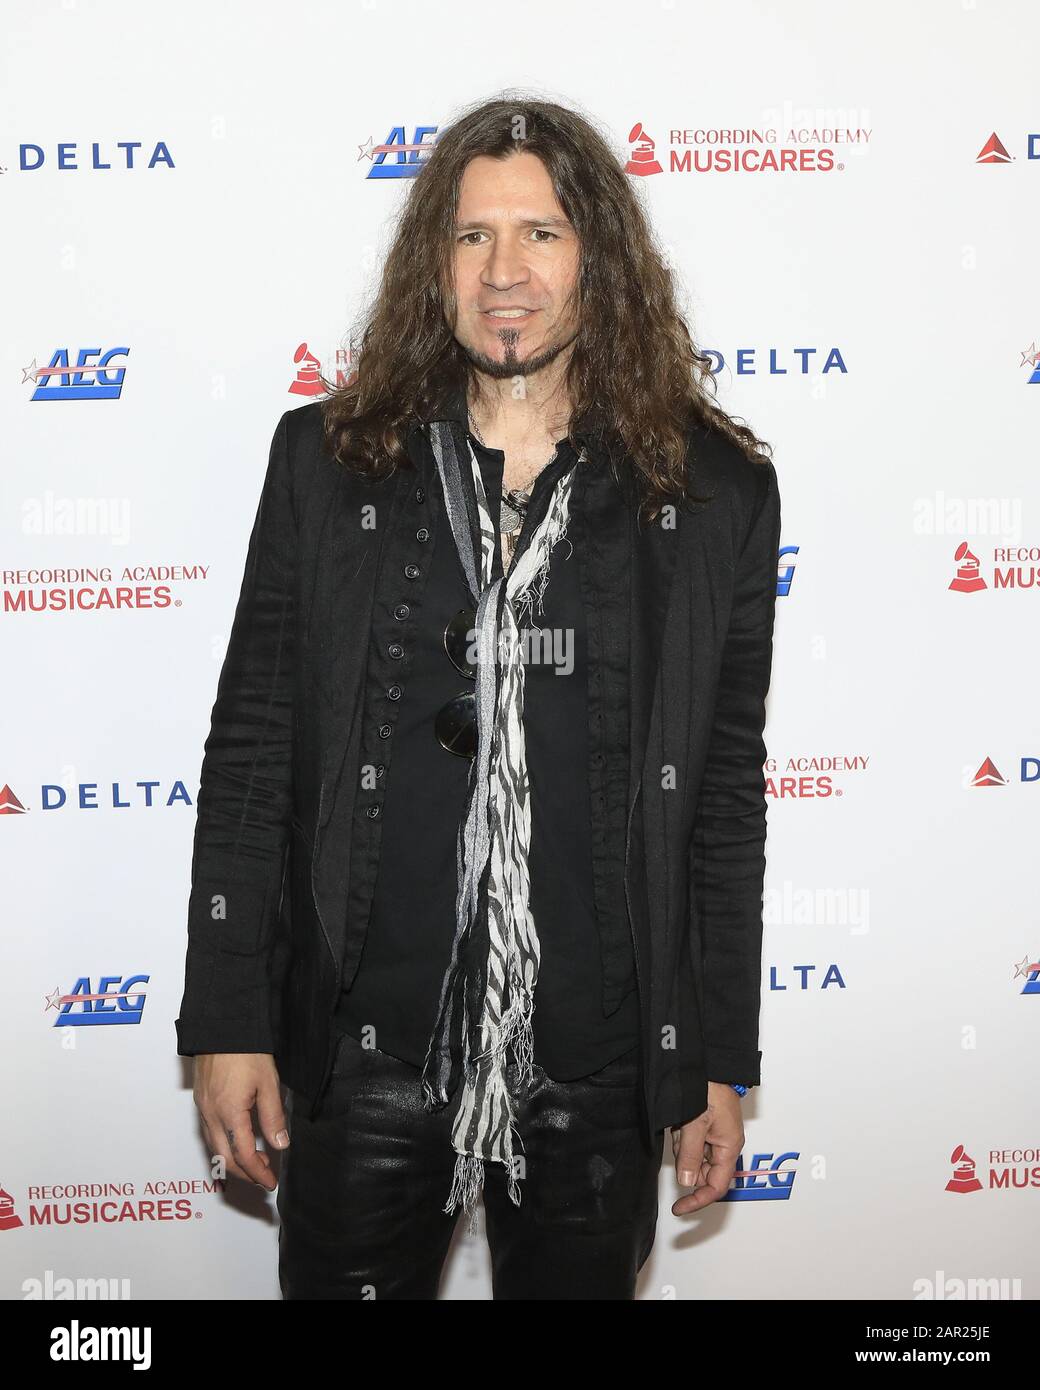 January 24, 2020, Los Angeles, CA, USA: LOS ANGELES - JAN 24:  Phil X at the 2020 Muiscares at the Los Angeles Convention Center on January 24, 2020 in Los Angeles, CA (Credit Image: © Kay Blake/ZUMA Wire) Stock Photo